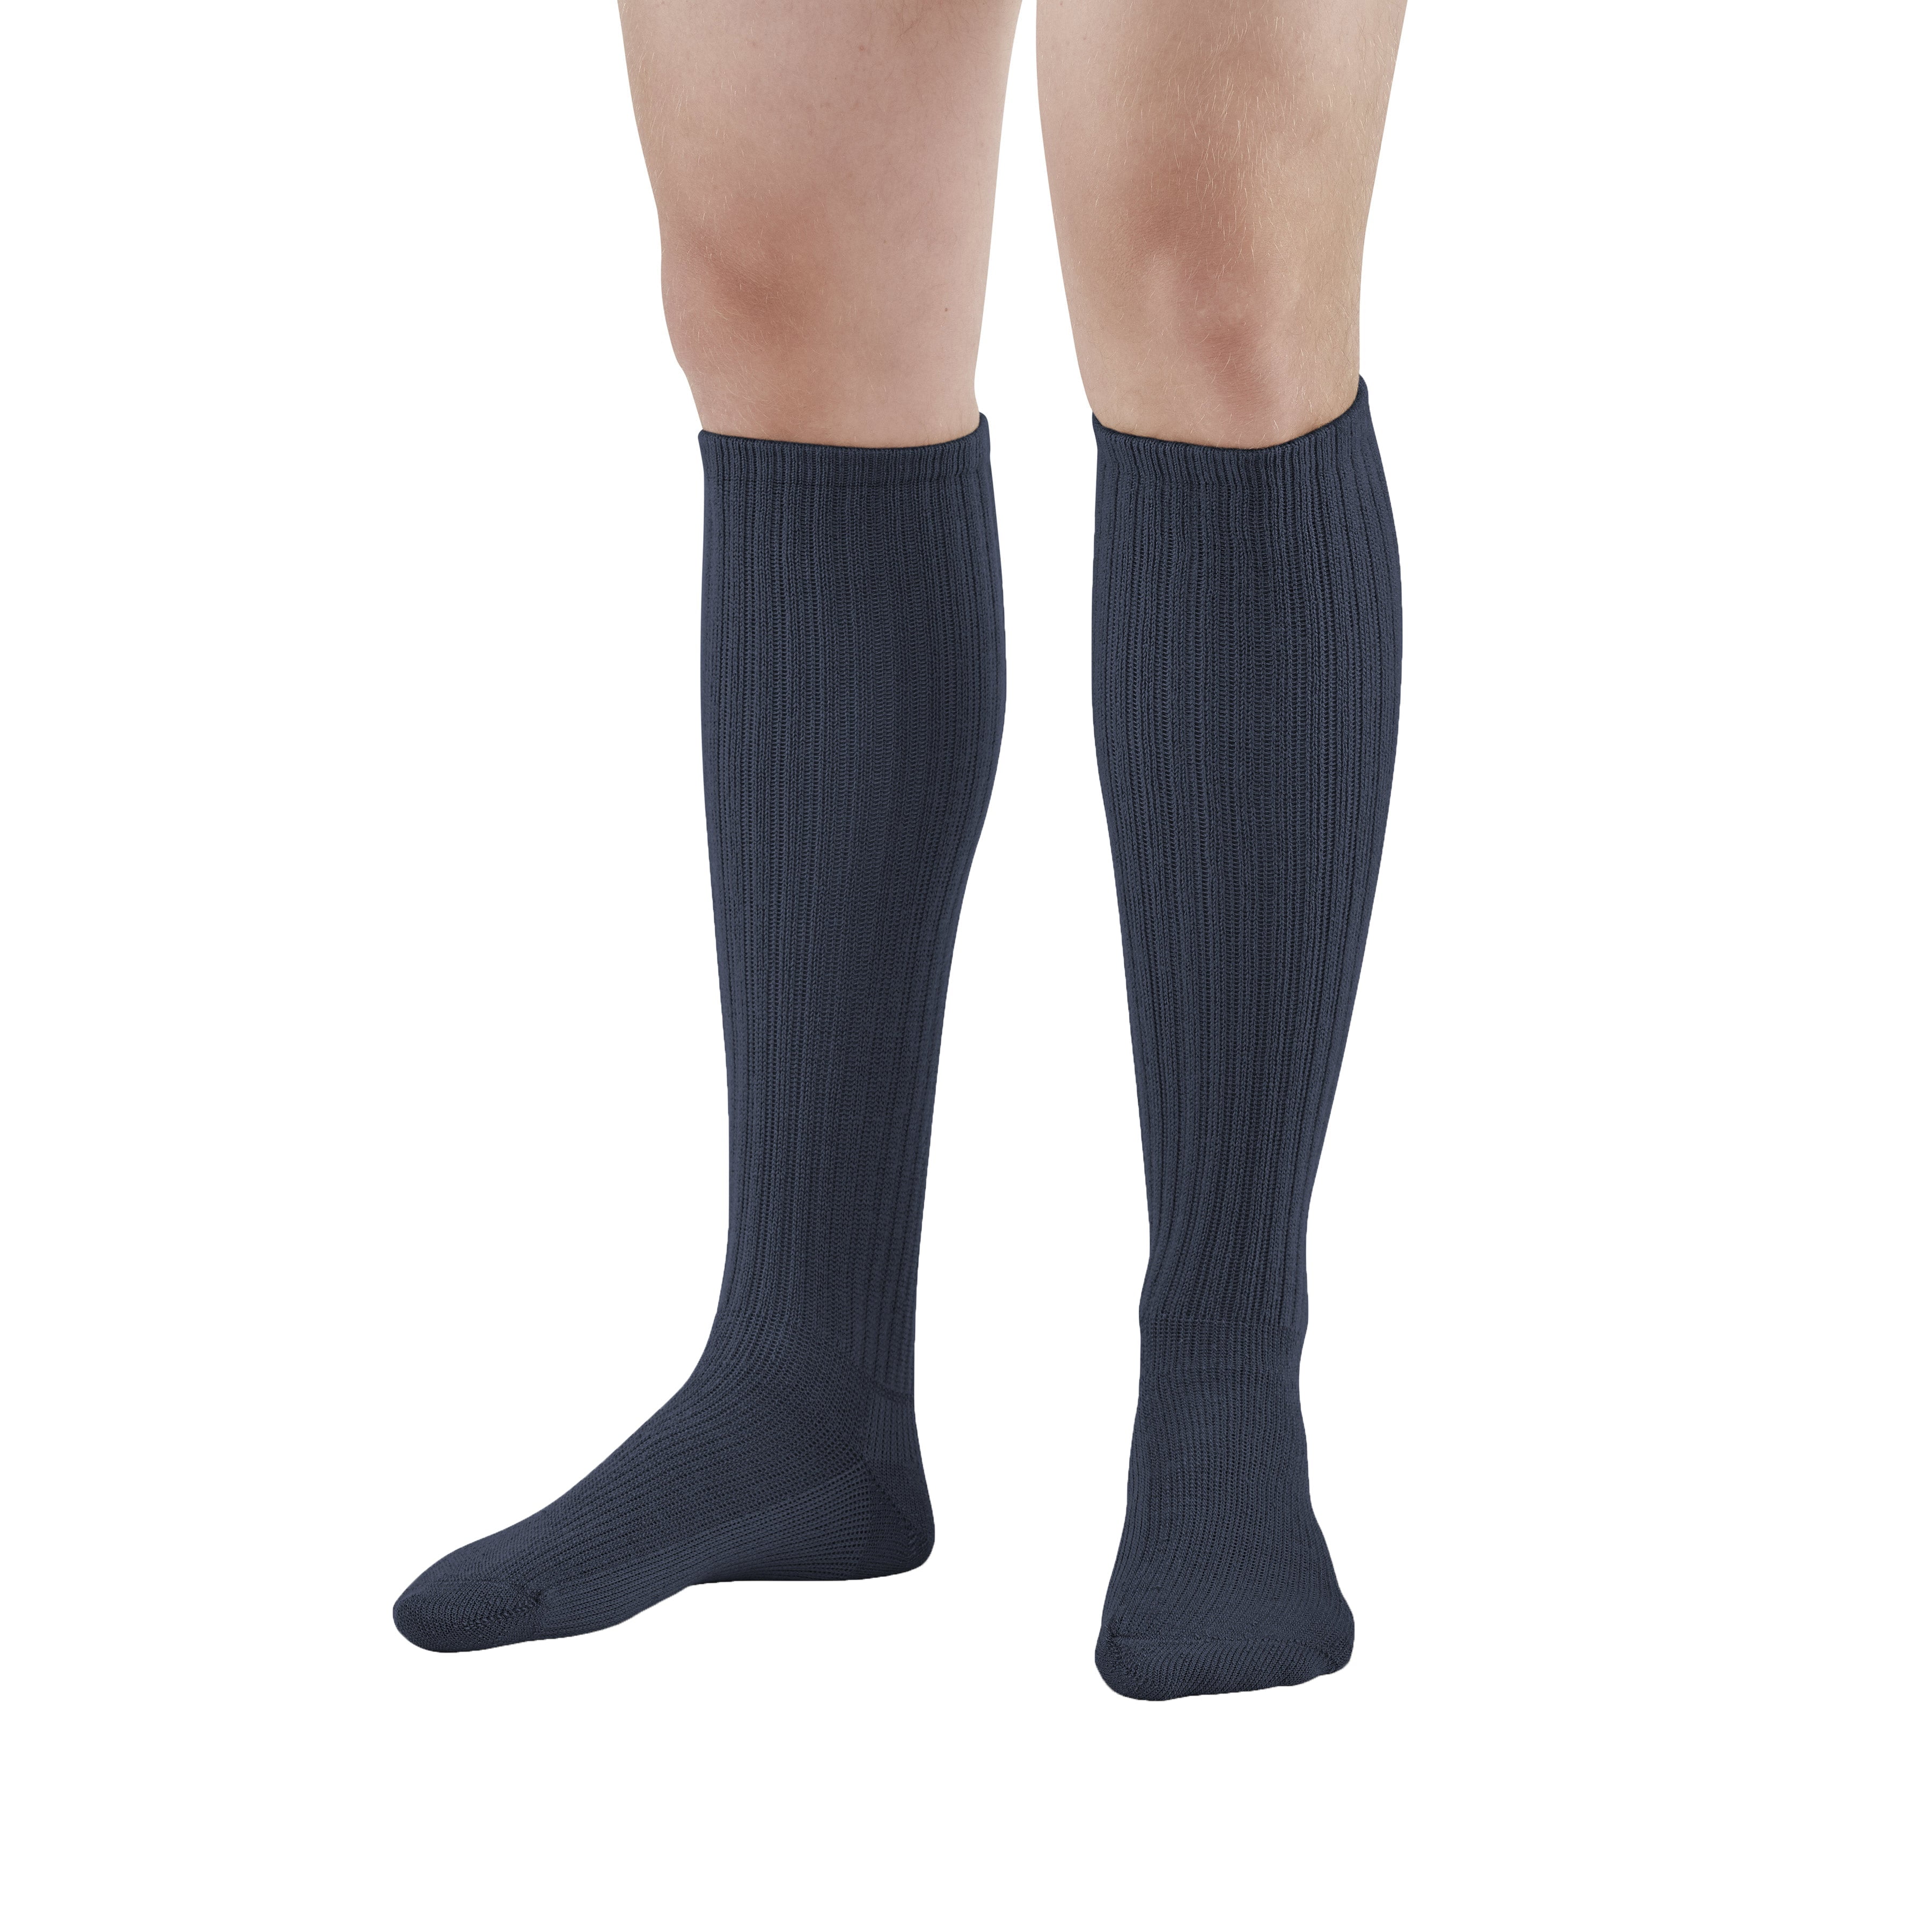 Ames Walker AW Style 180 E-Z Walker Plus Diabetic 8-15 Mild Compression  Knee High Socks - Help prevent discomfort swelling and mild venous issues -  Moisture wicking - Padded foot 